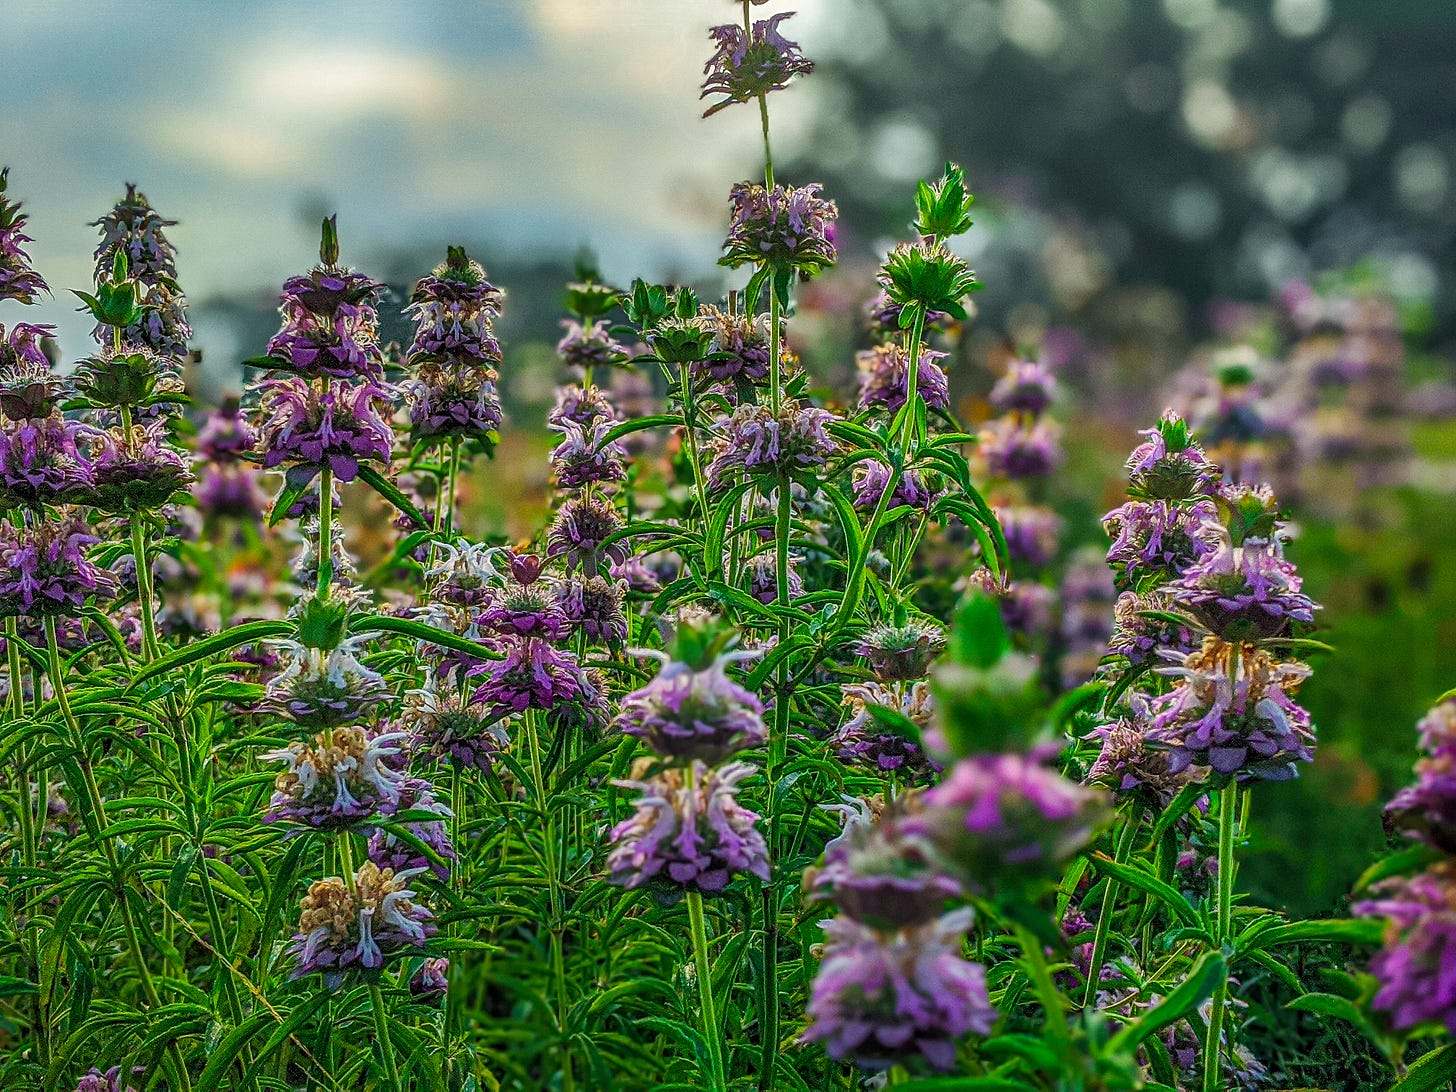 Clusters of Purple Horsemint, the tall green stems with green leaves capped by an explosion of purple flowers. 